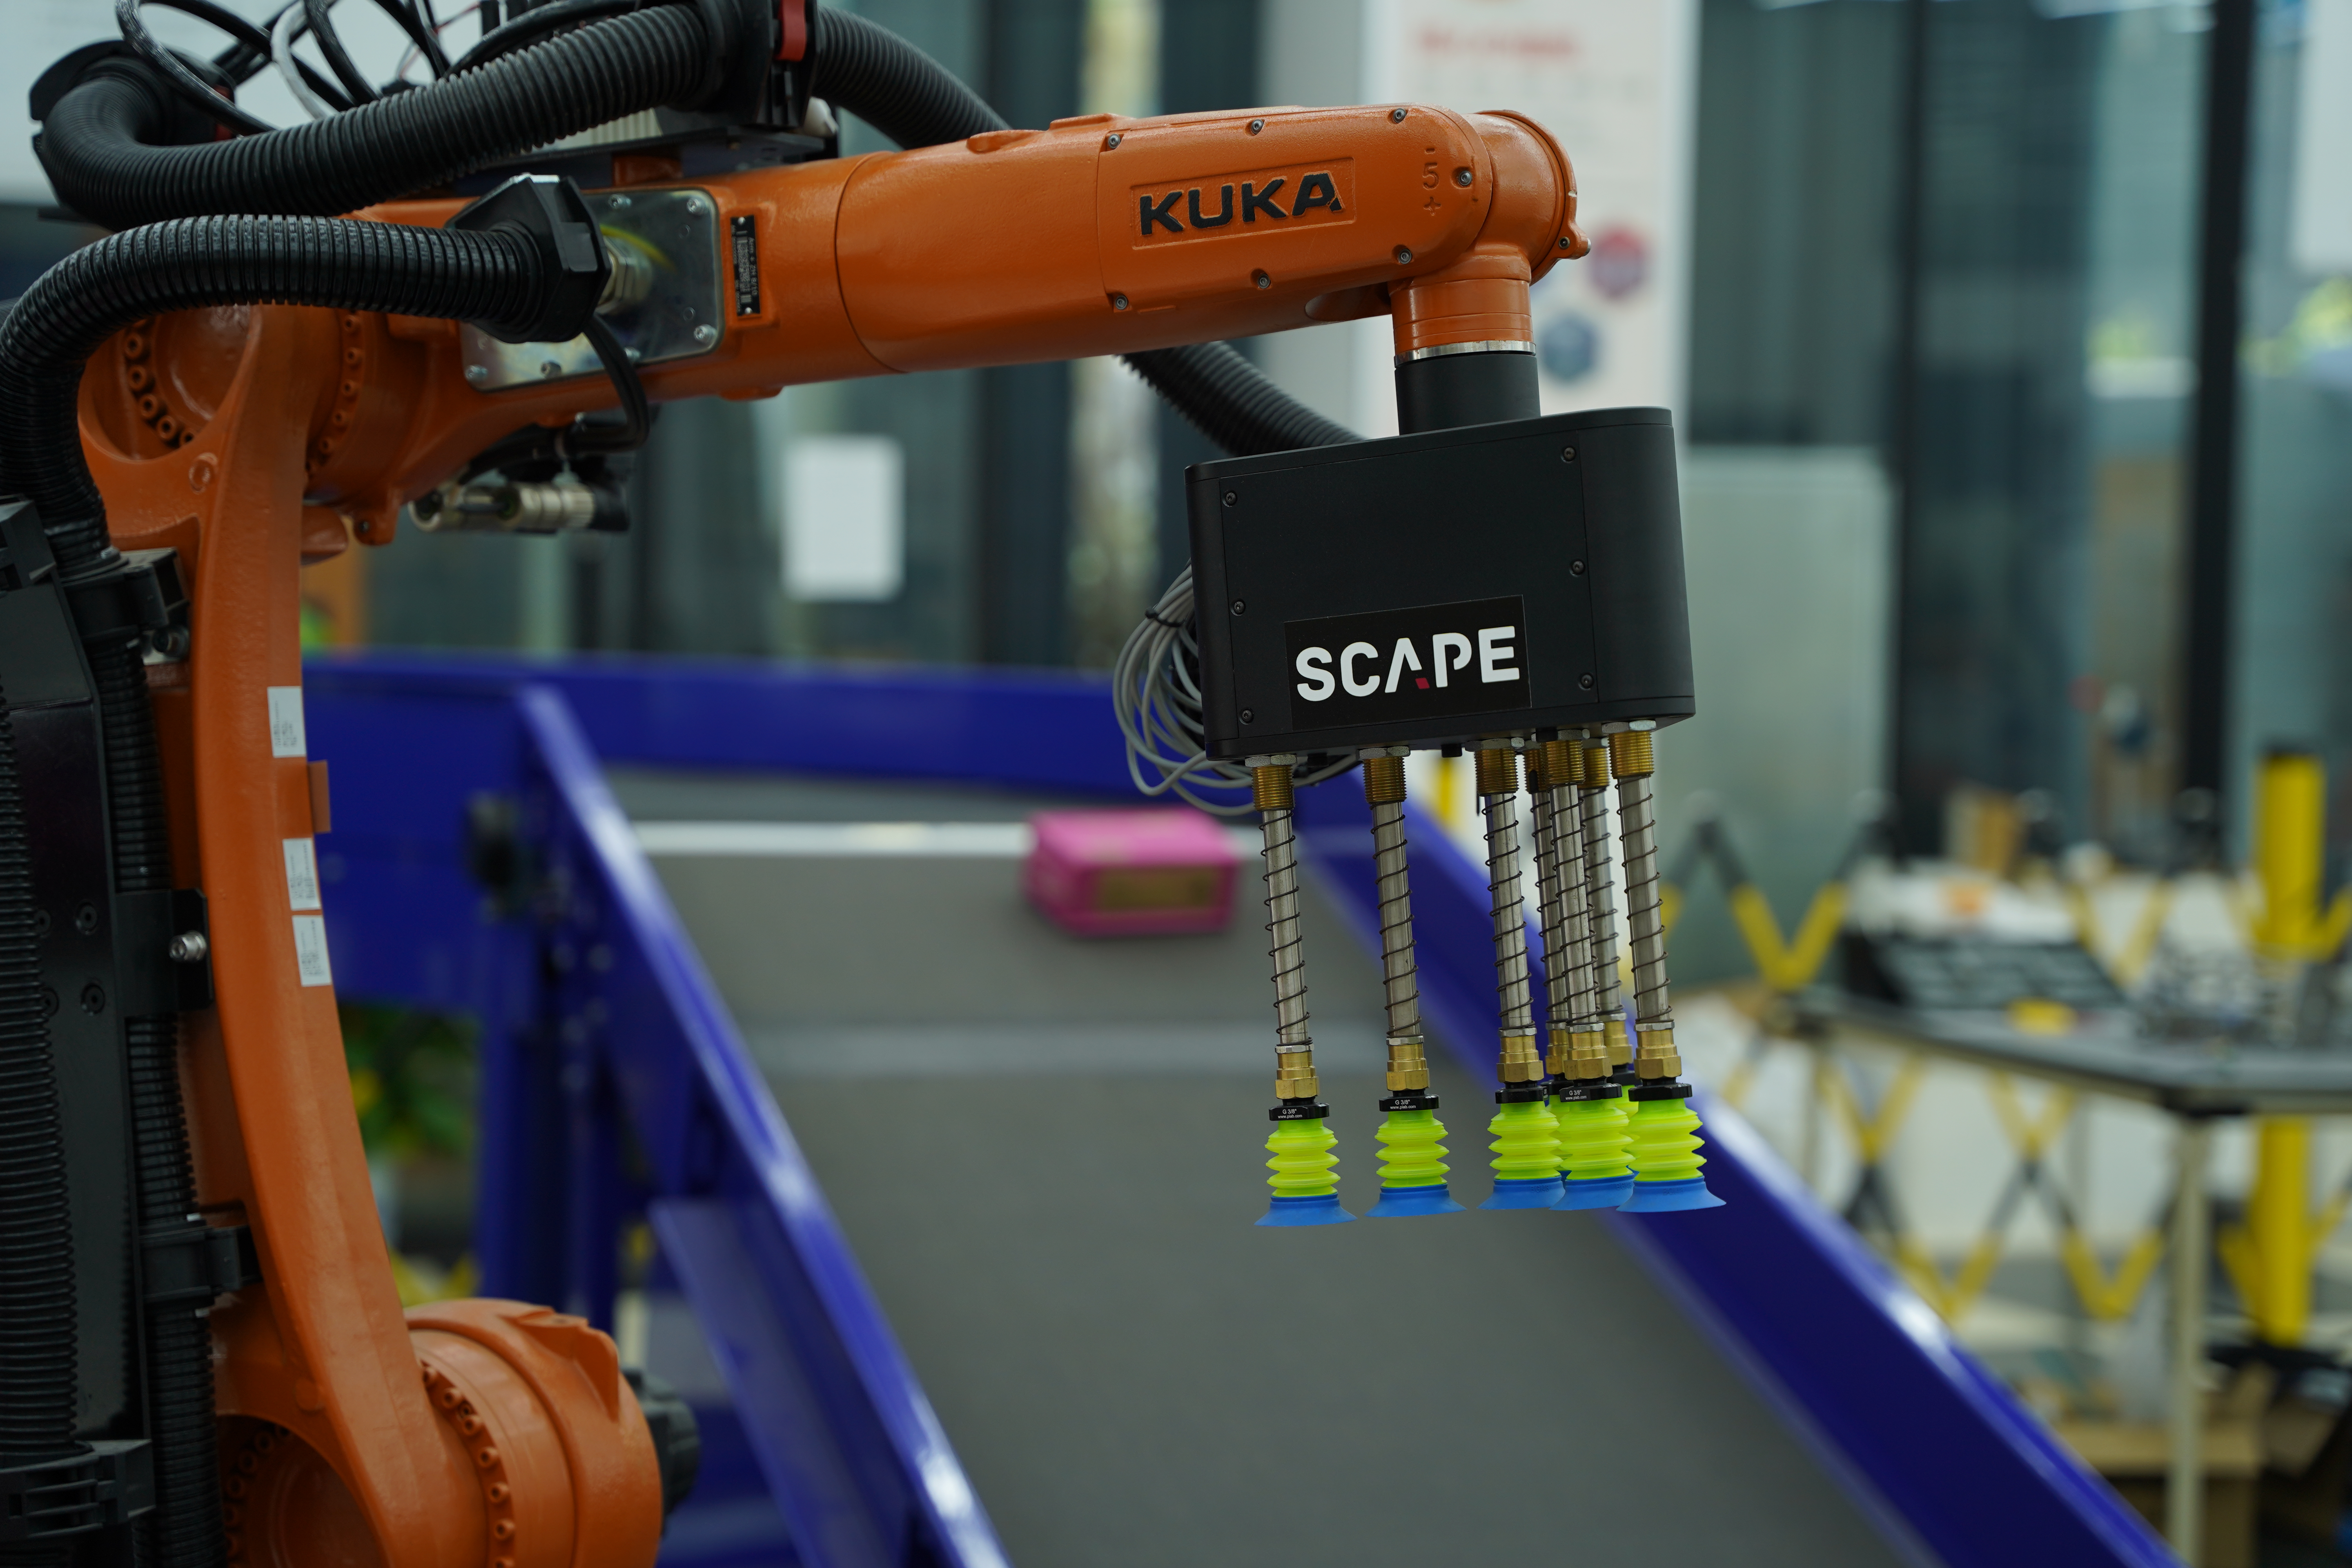 SCAPE Package Picker solution for automatic handling of parcels, integrated on a KUKA robot